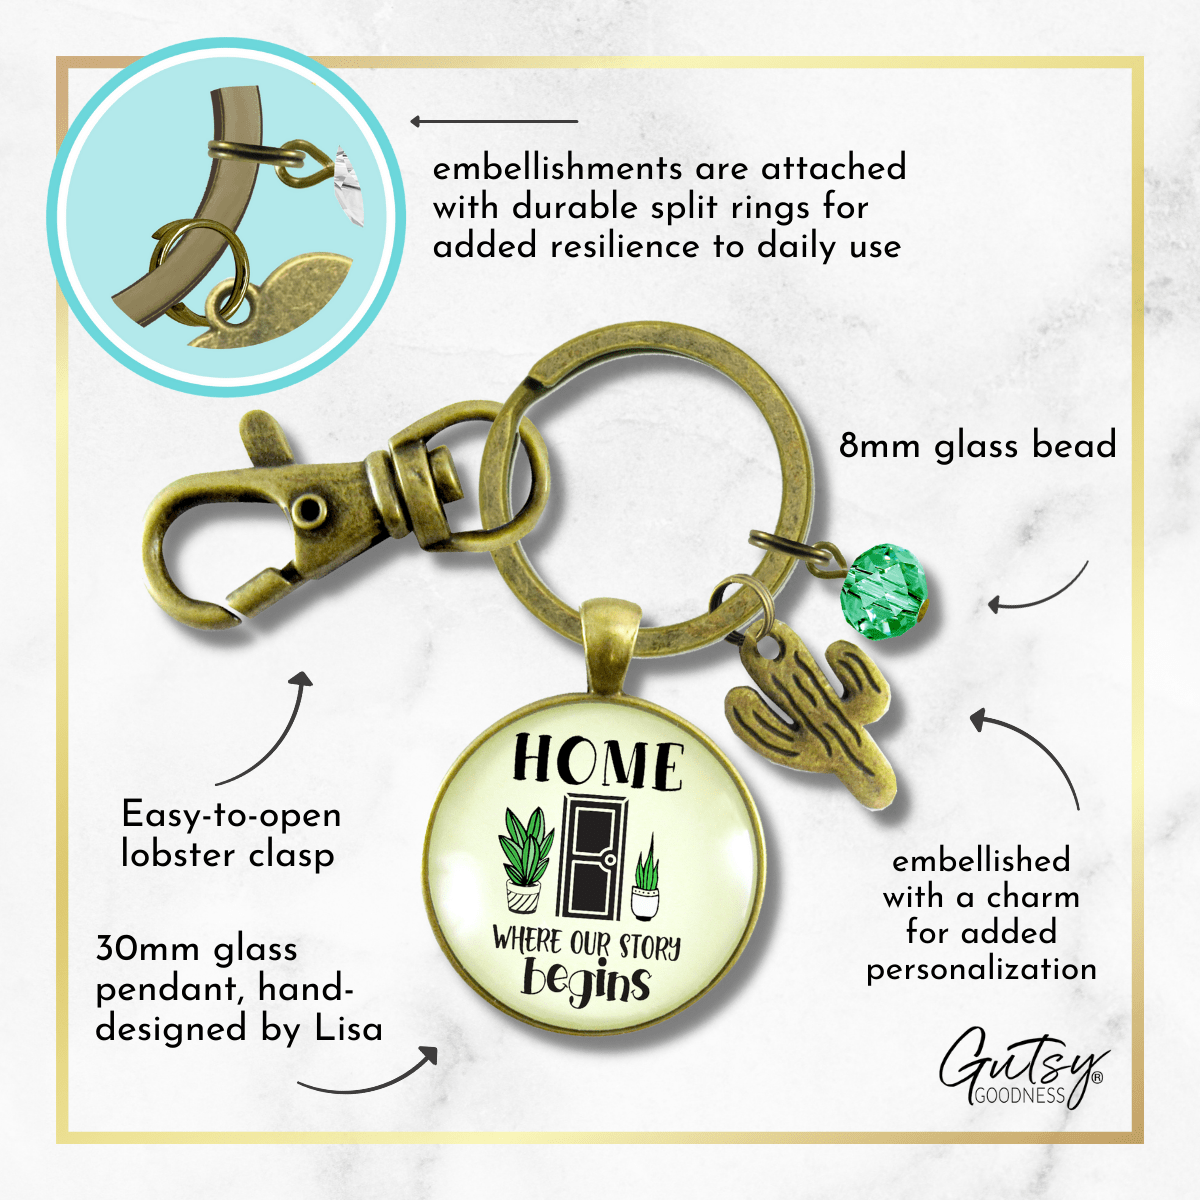 Our First Home Keychain Where Our Story Begins Texas Arizona Inspired Housewarming Gift  Keychain - Unisex - Gutsy Goodness Handmade Jewelry